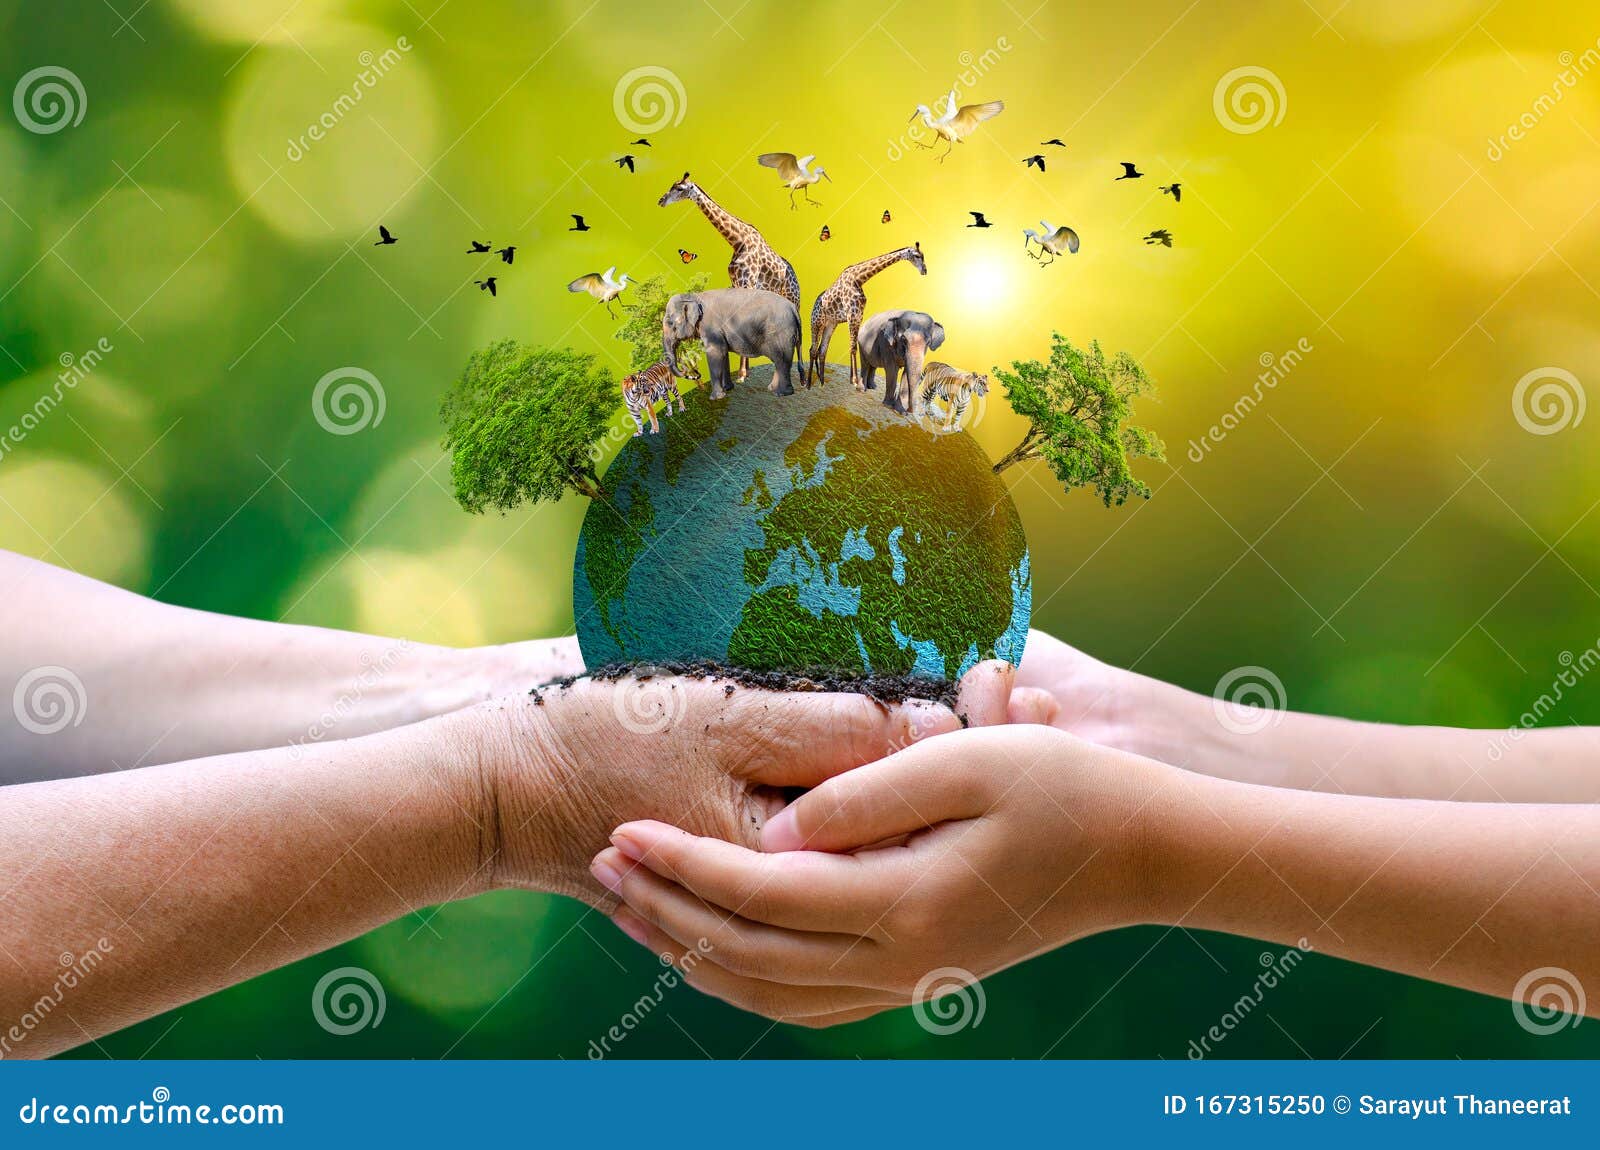 Concept Nature Reserve Conserve Wildlife Tiger Deer Global Warming Food Loaf Ecology Human Hands Protecting the Wild and Stock Photo - Image of life, preserve: 167315250